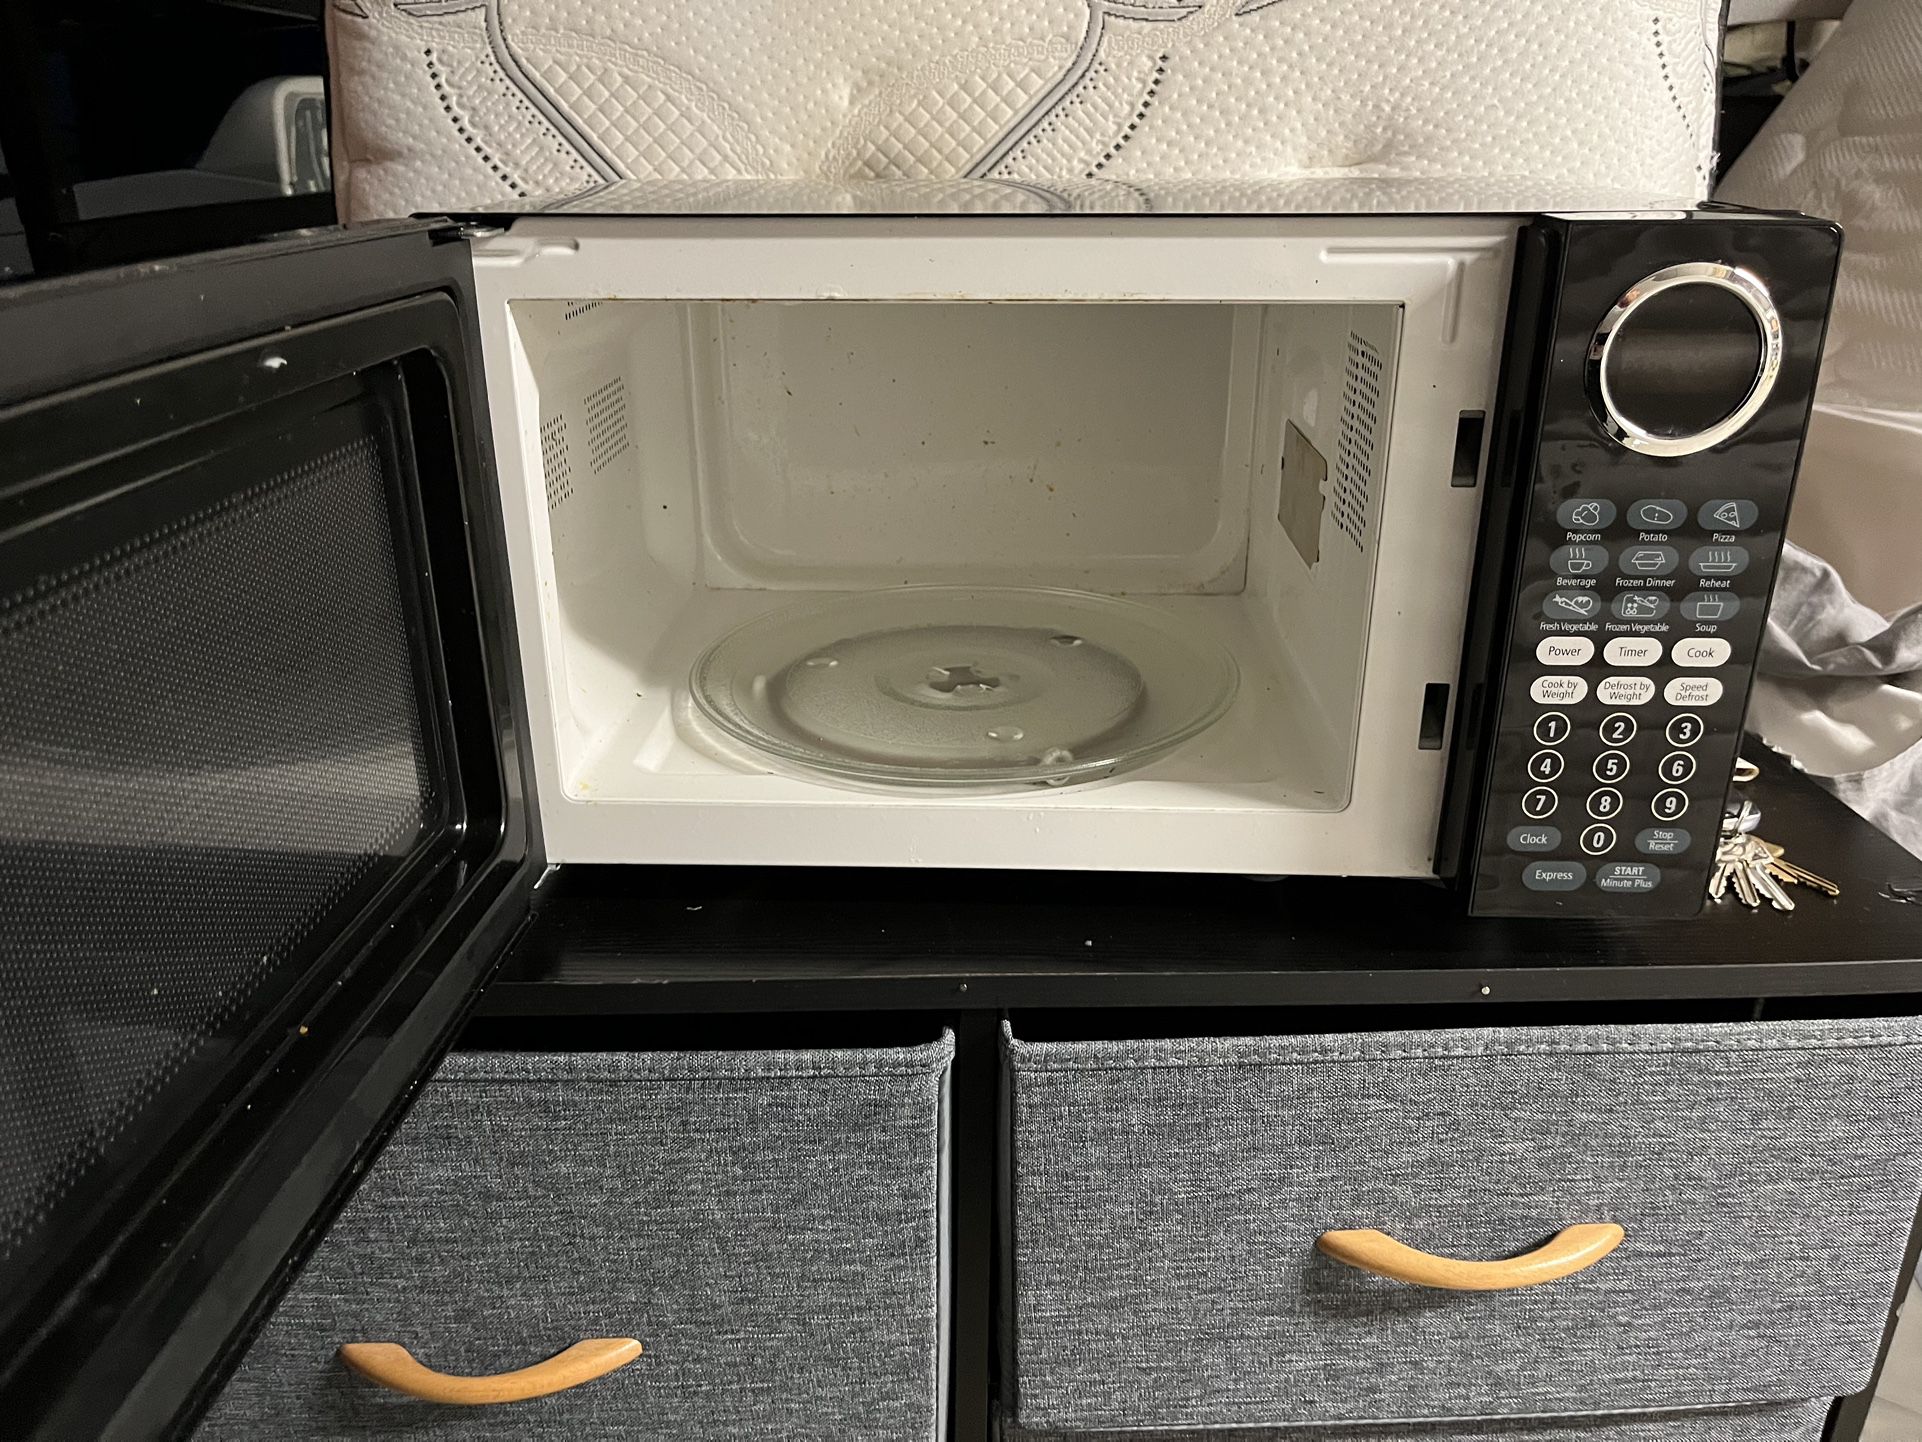 Sunbeam Microwave for Sale in Cary, NC - OfferUp